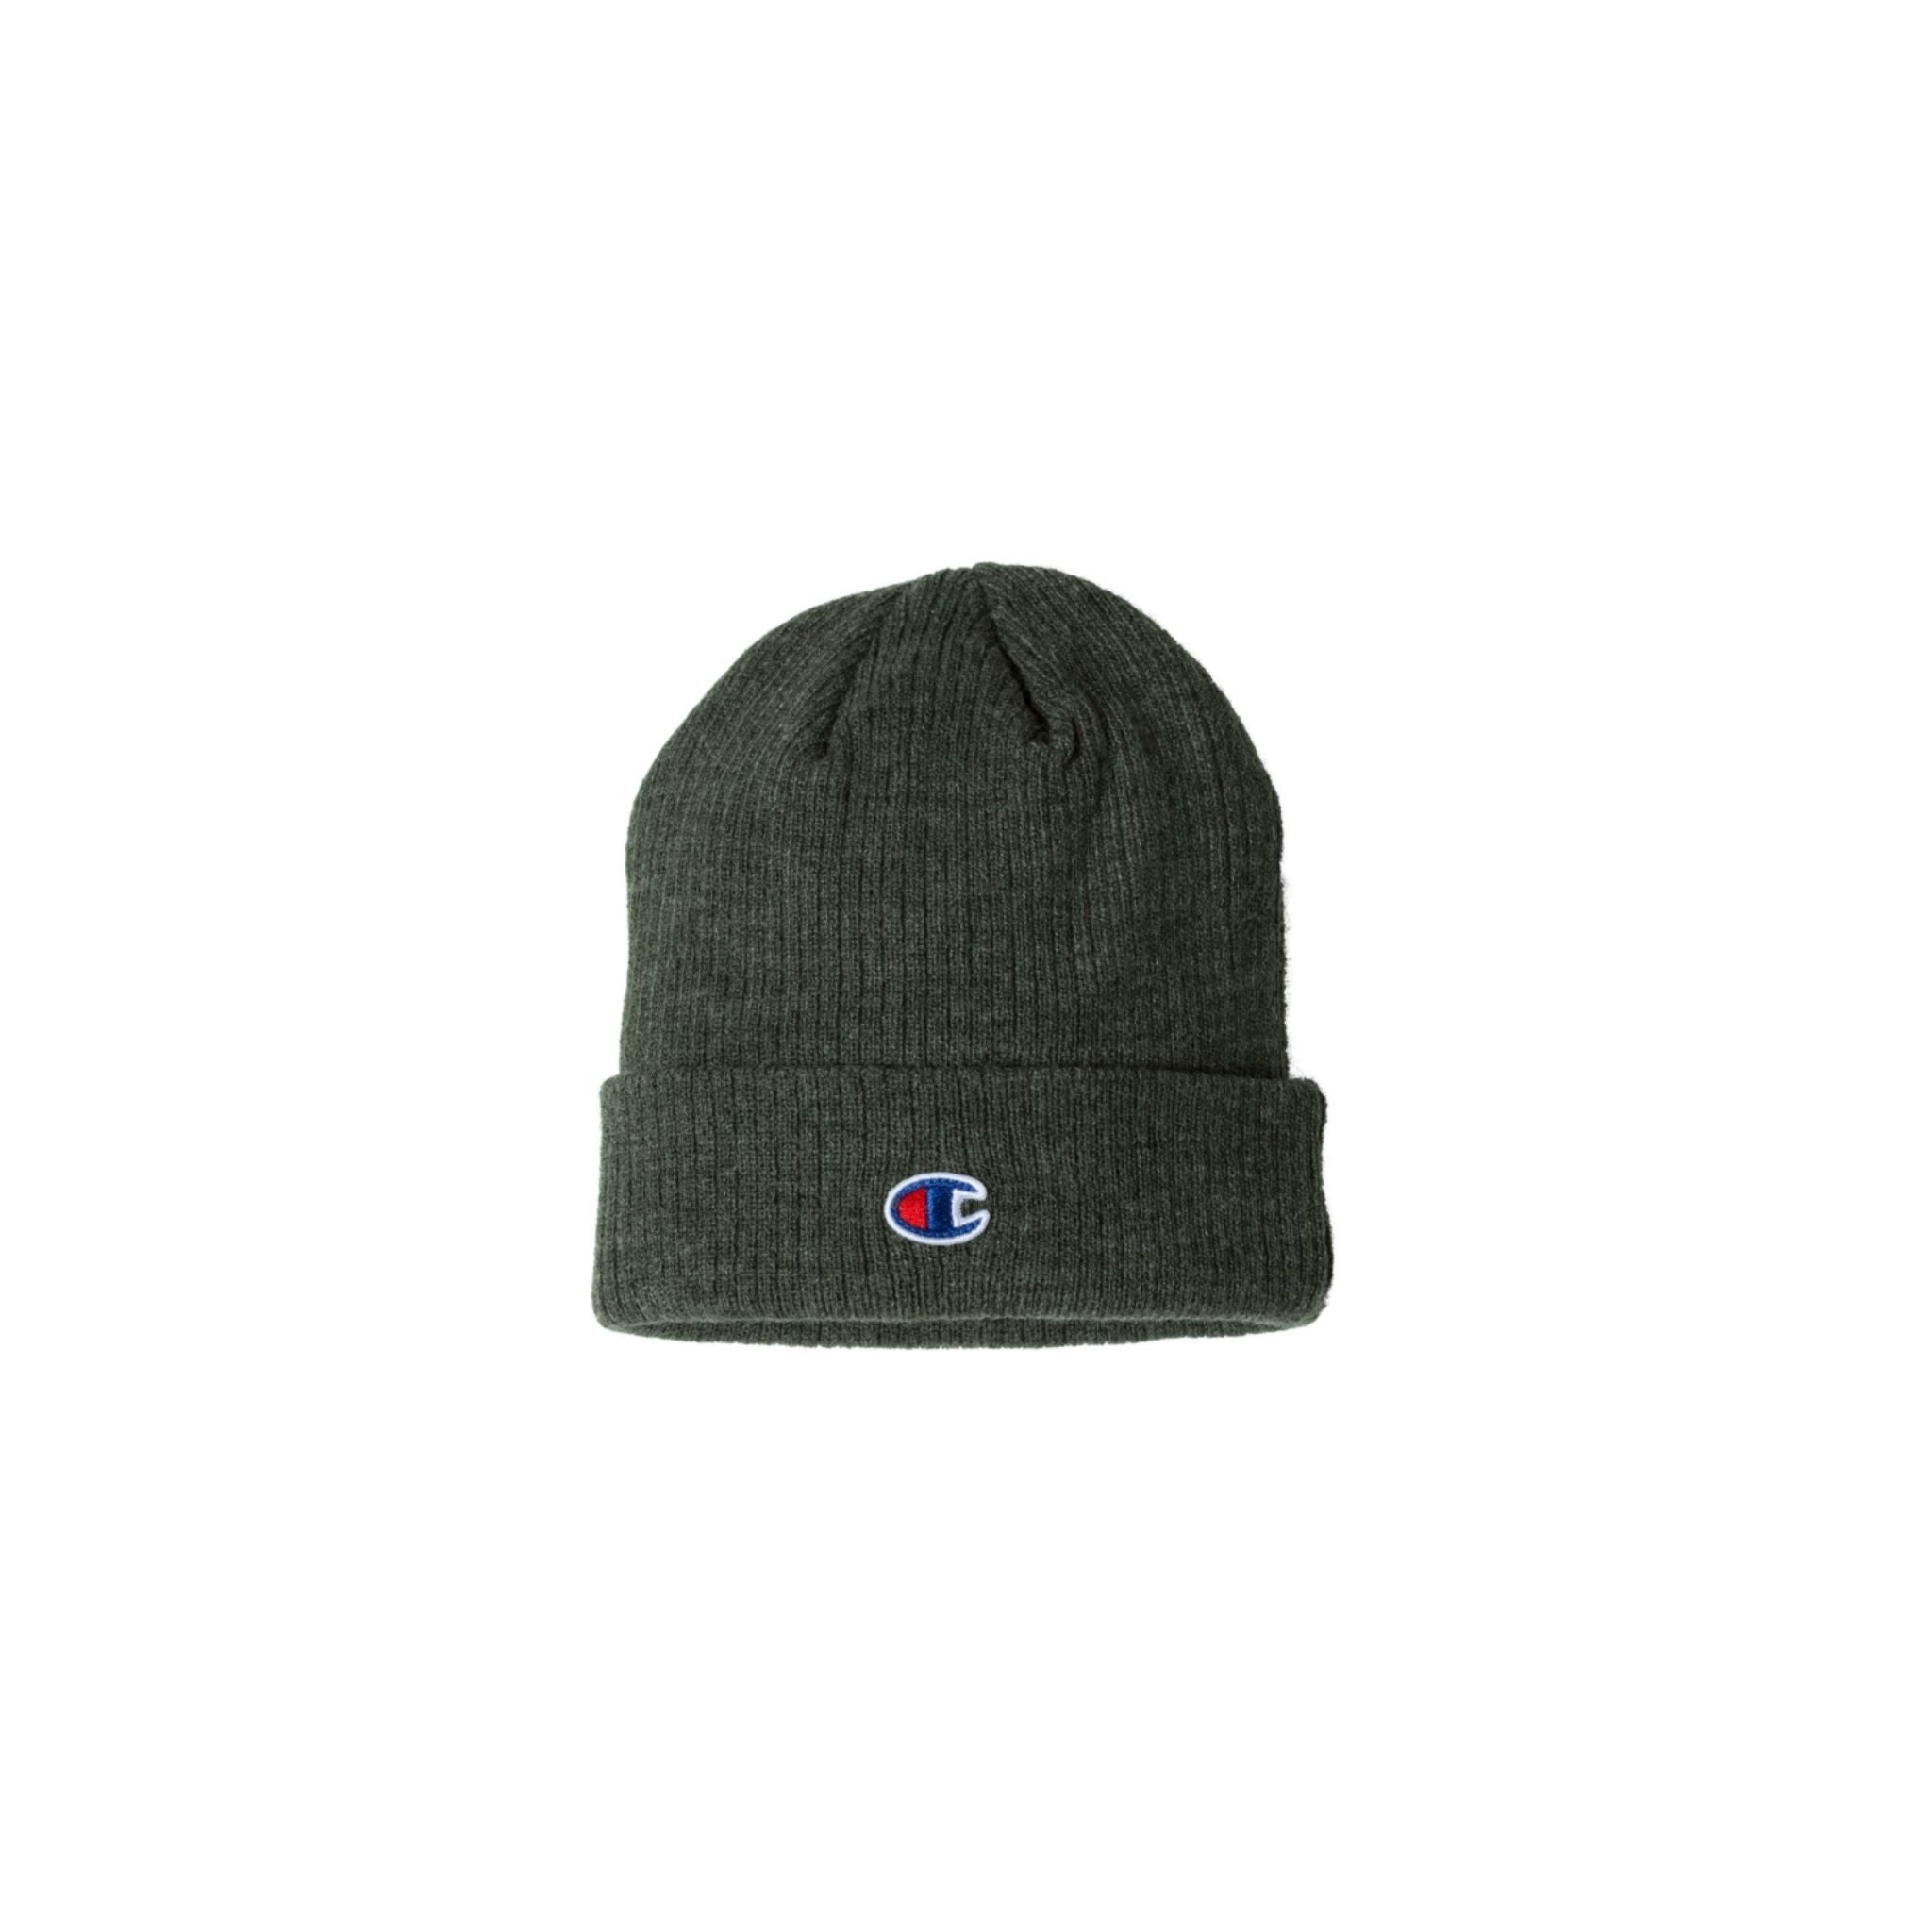 forest green metal tag beanie//